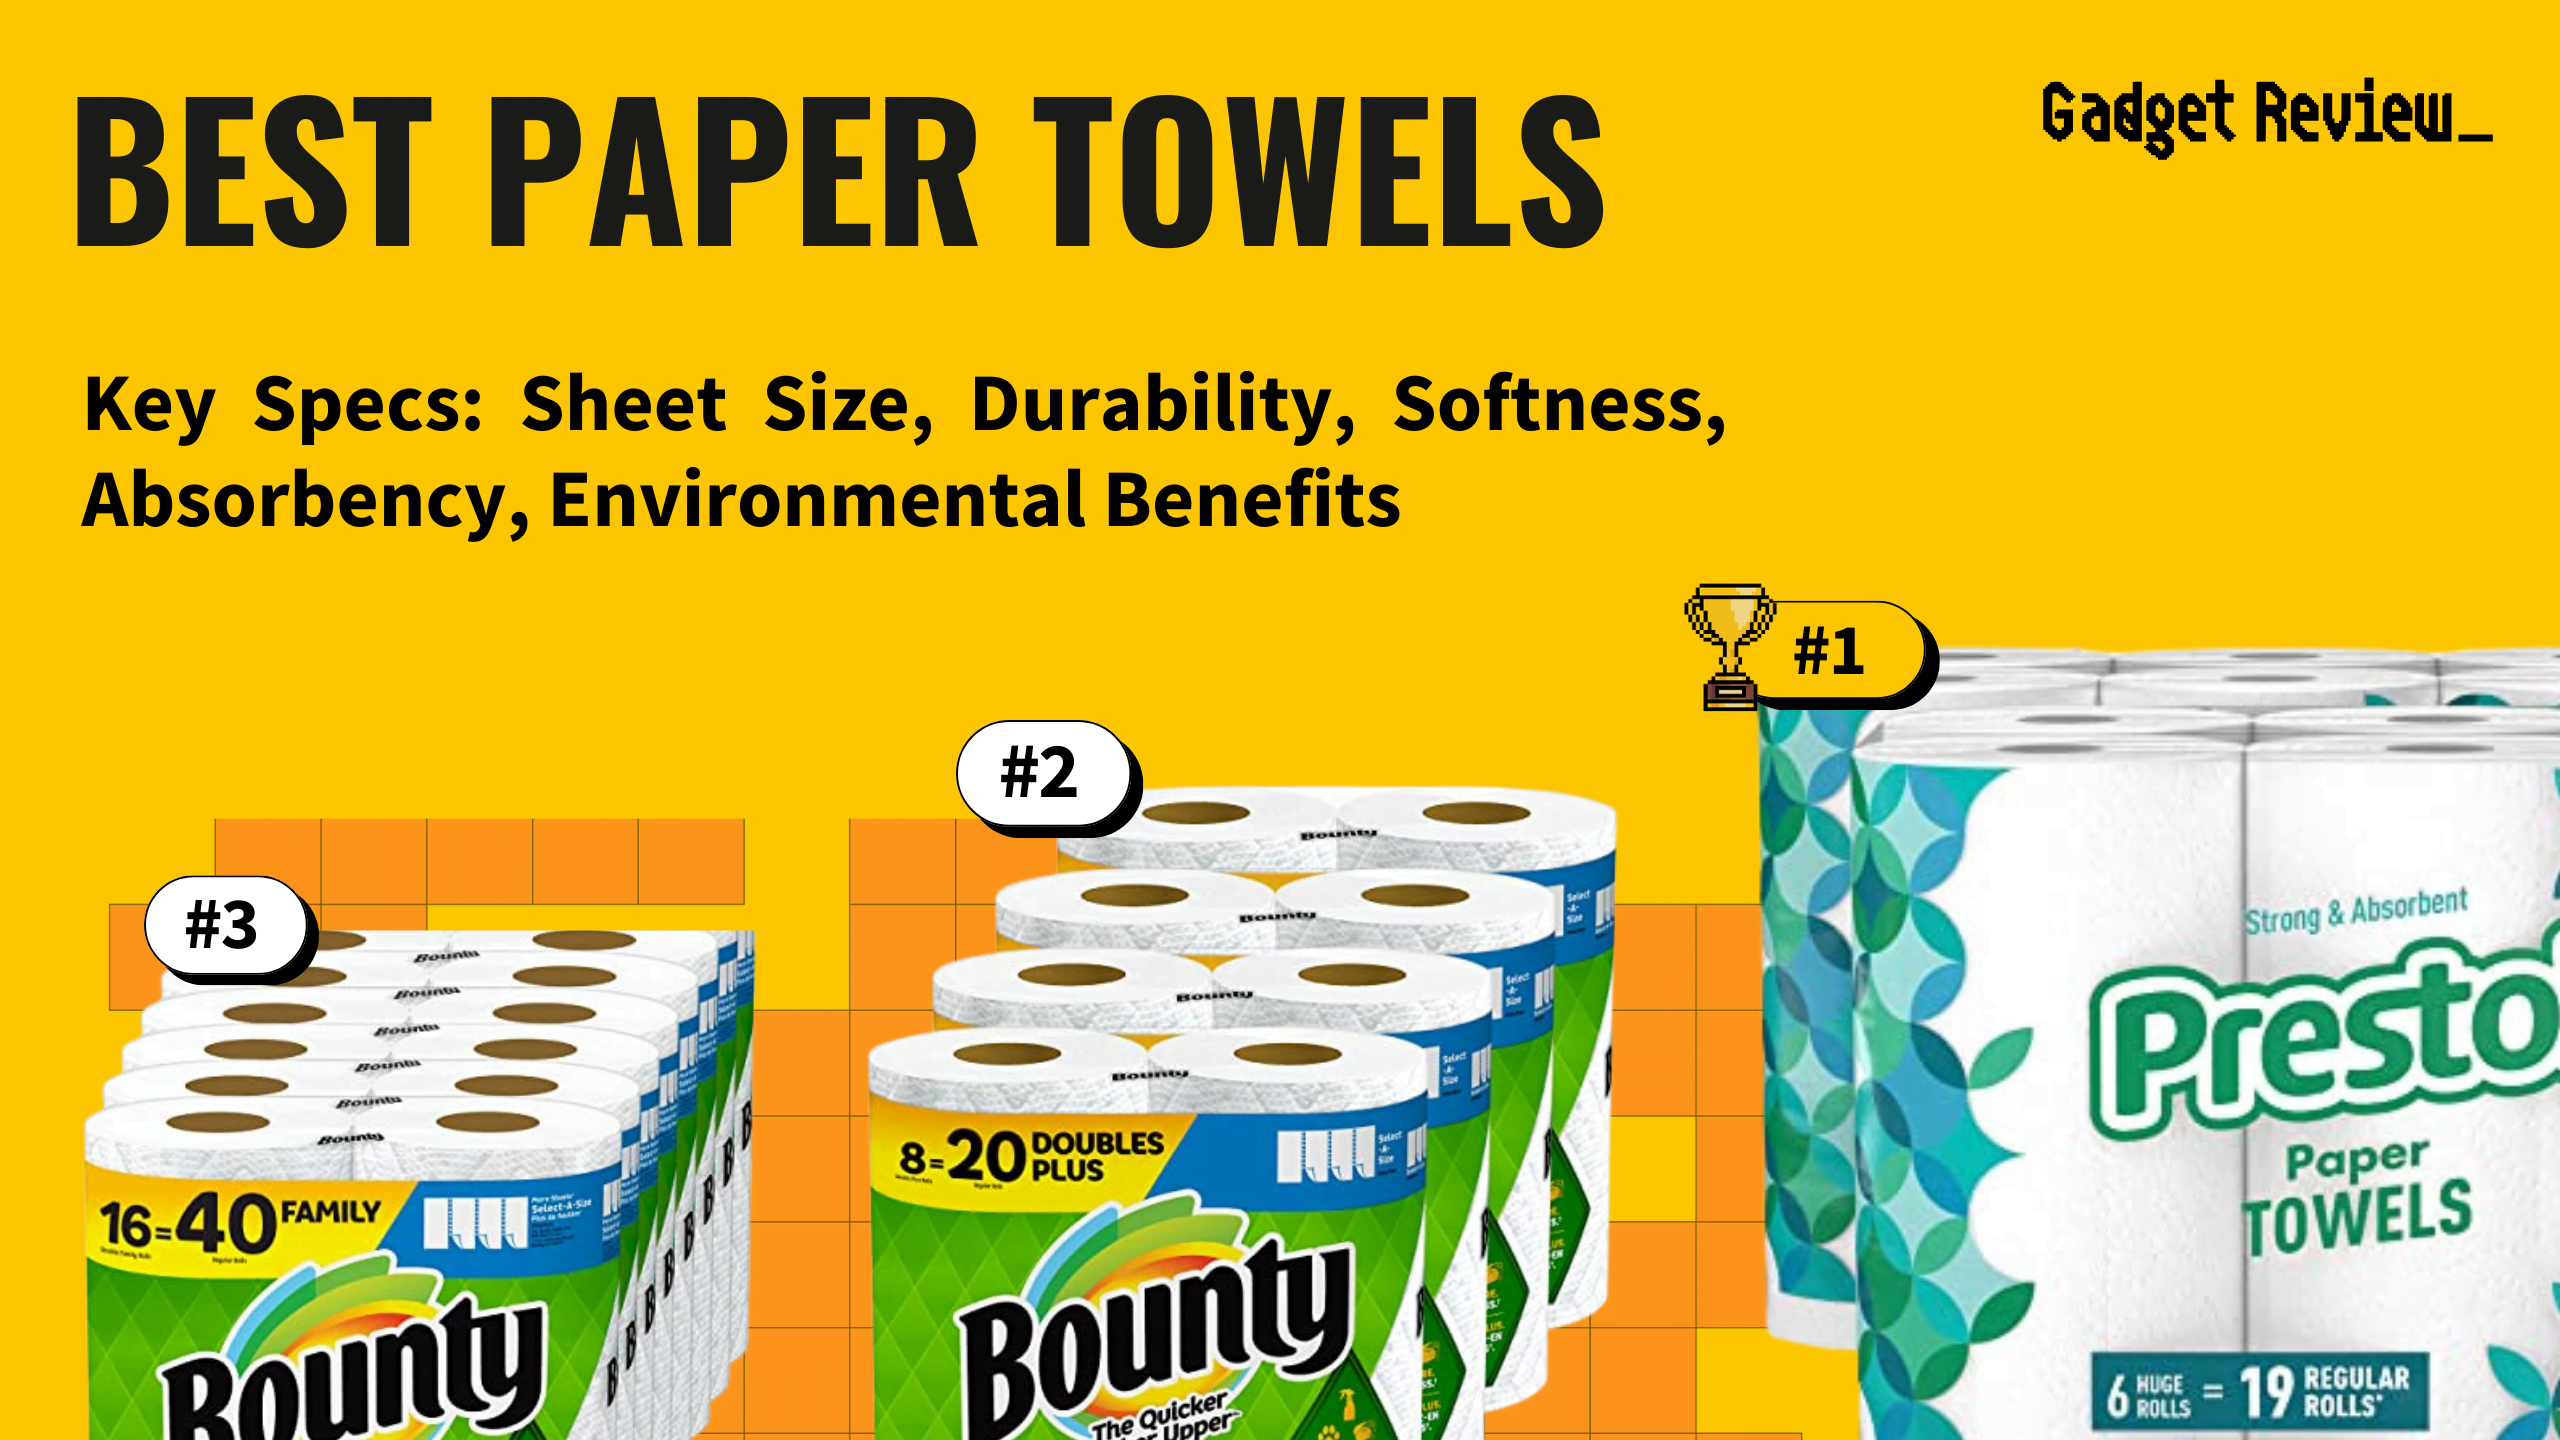 best paper towels featured image that shows the top three best kitchen product models